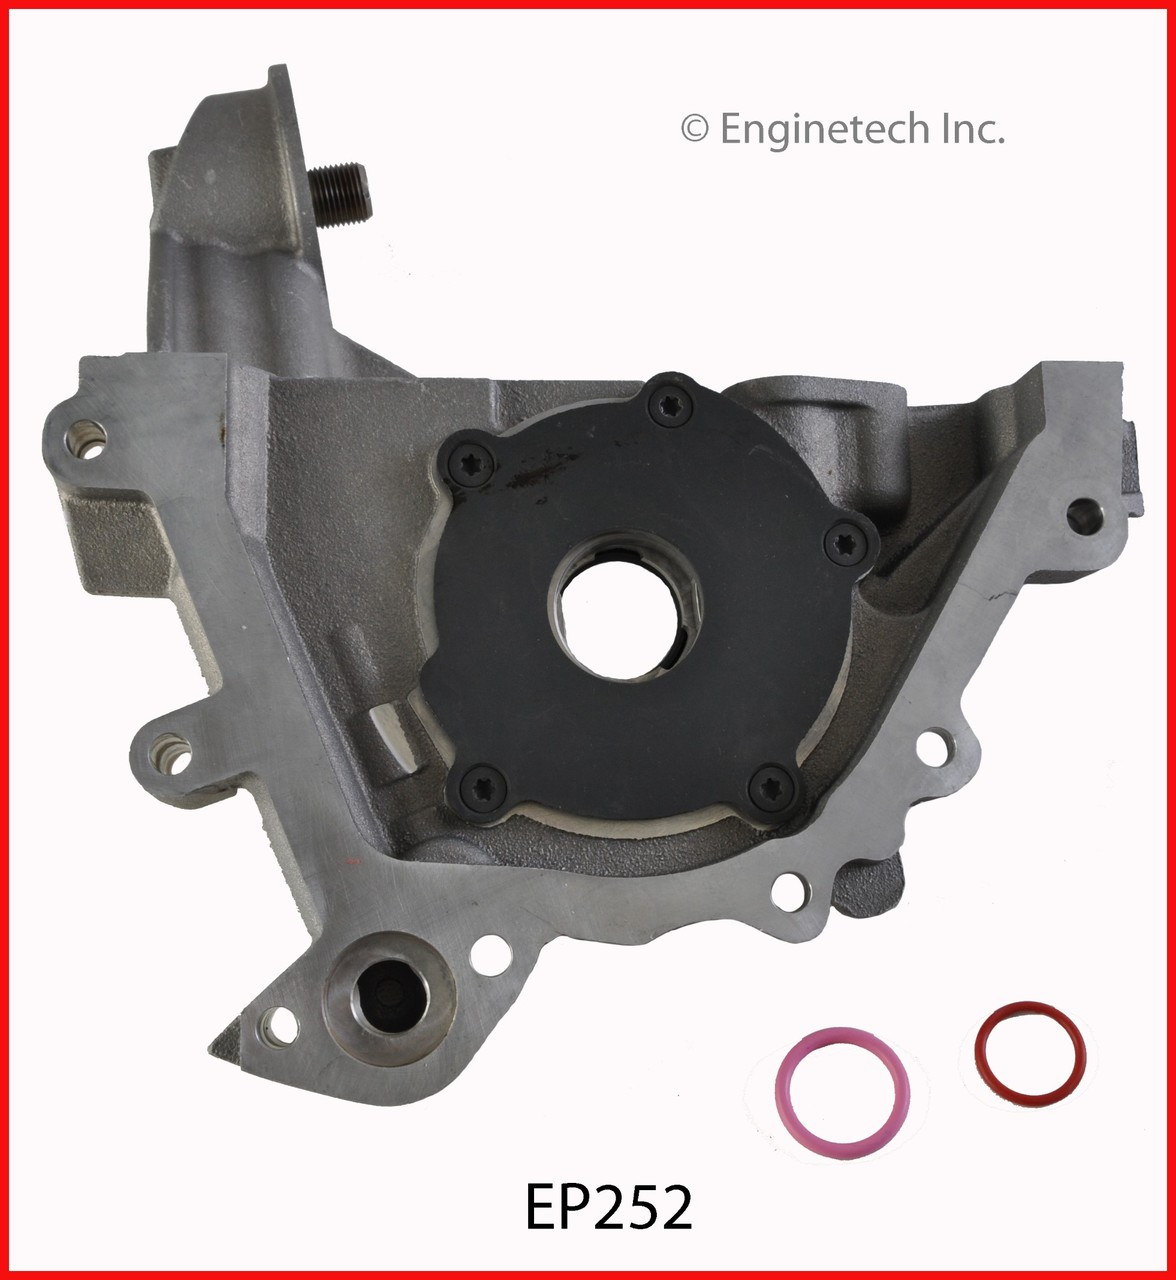 Oil Pump - 1996 Plymouth Voyager 2.4L (EP252.A7)